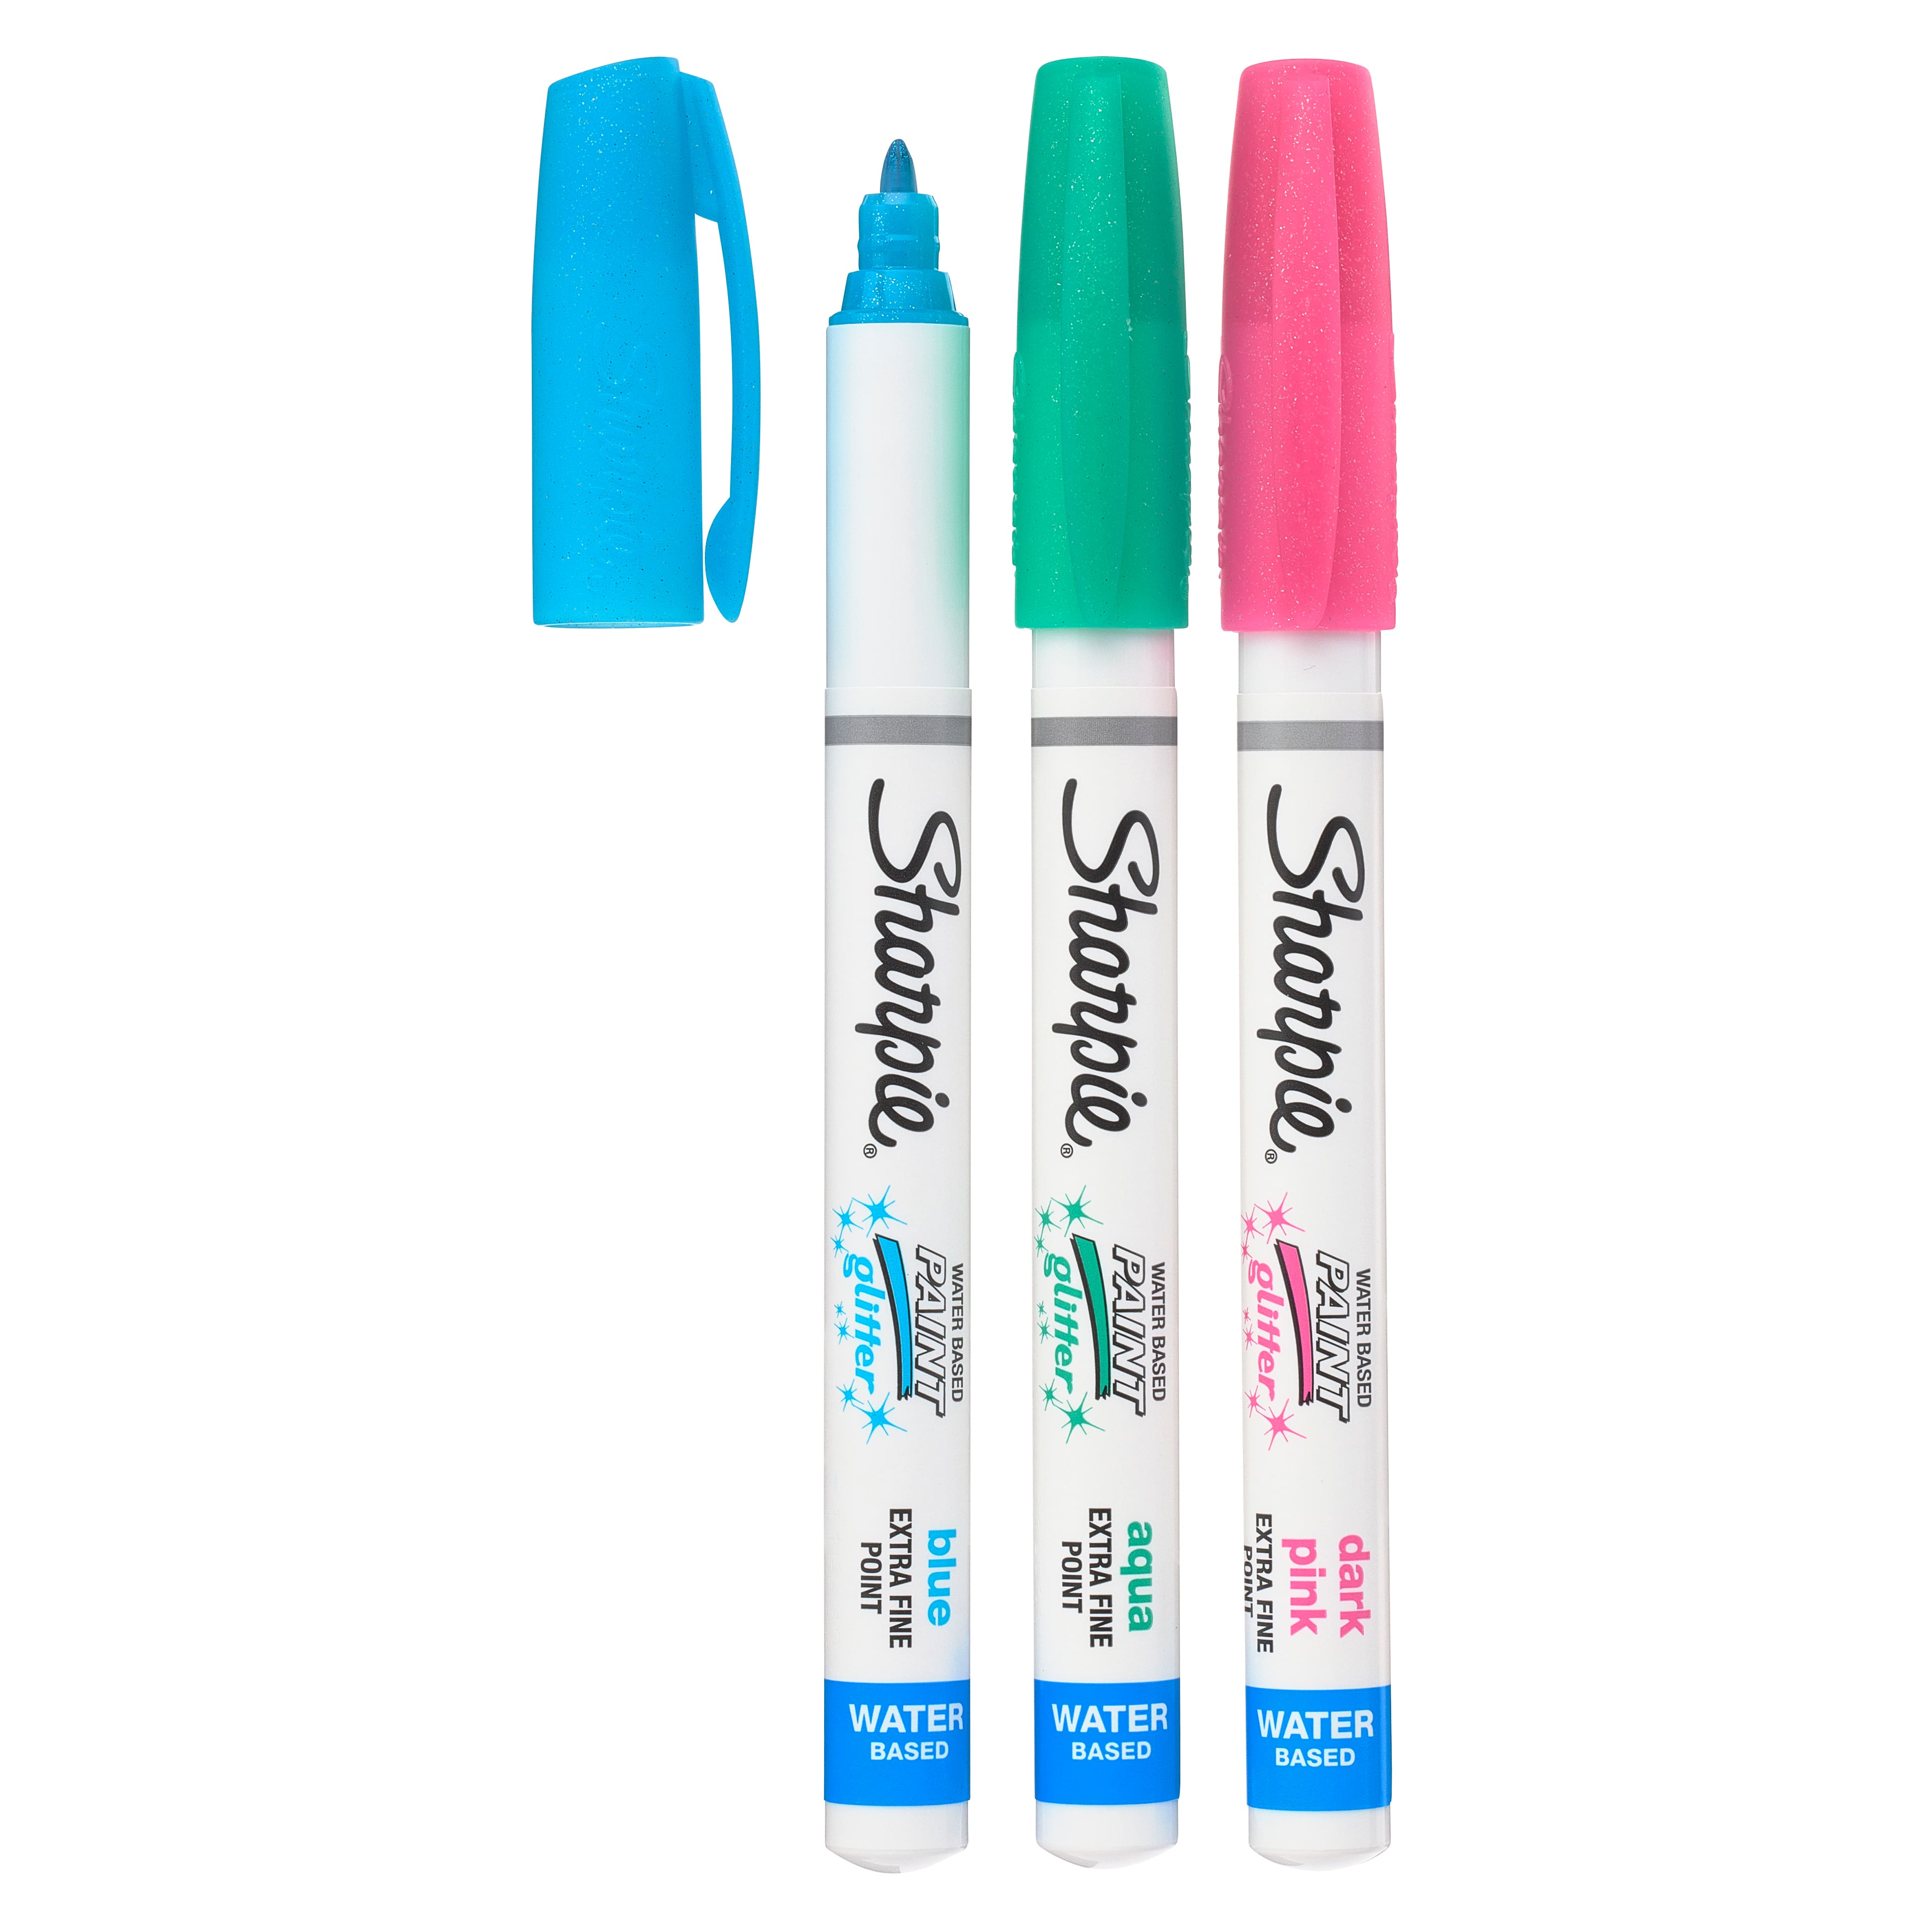 Sharpie® Water-Based Paint Markers, Extra Fine Point Glitter Pastel Set